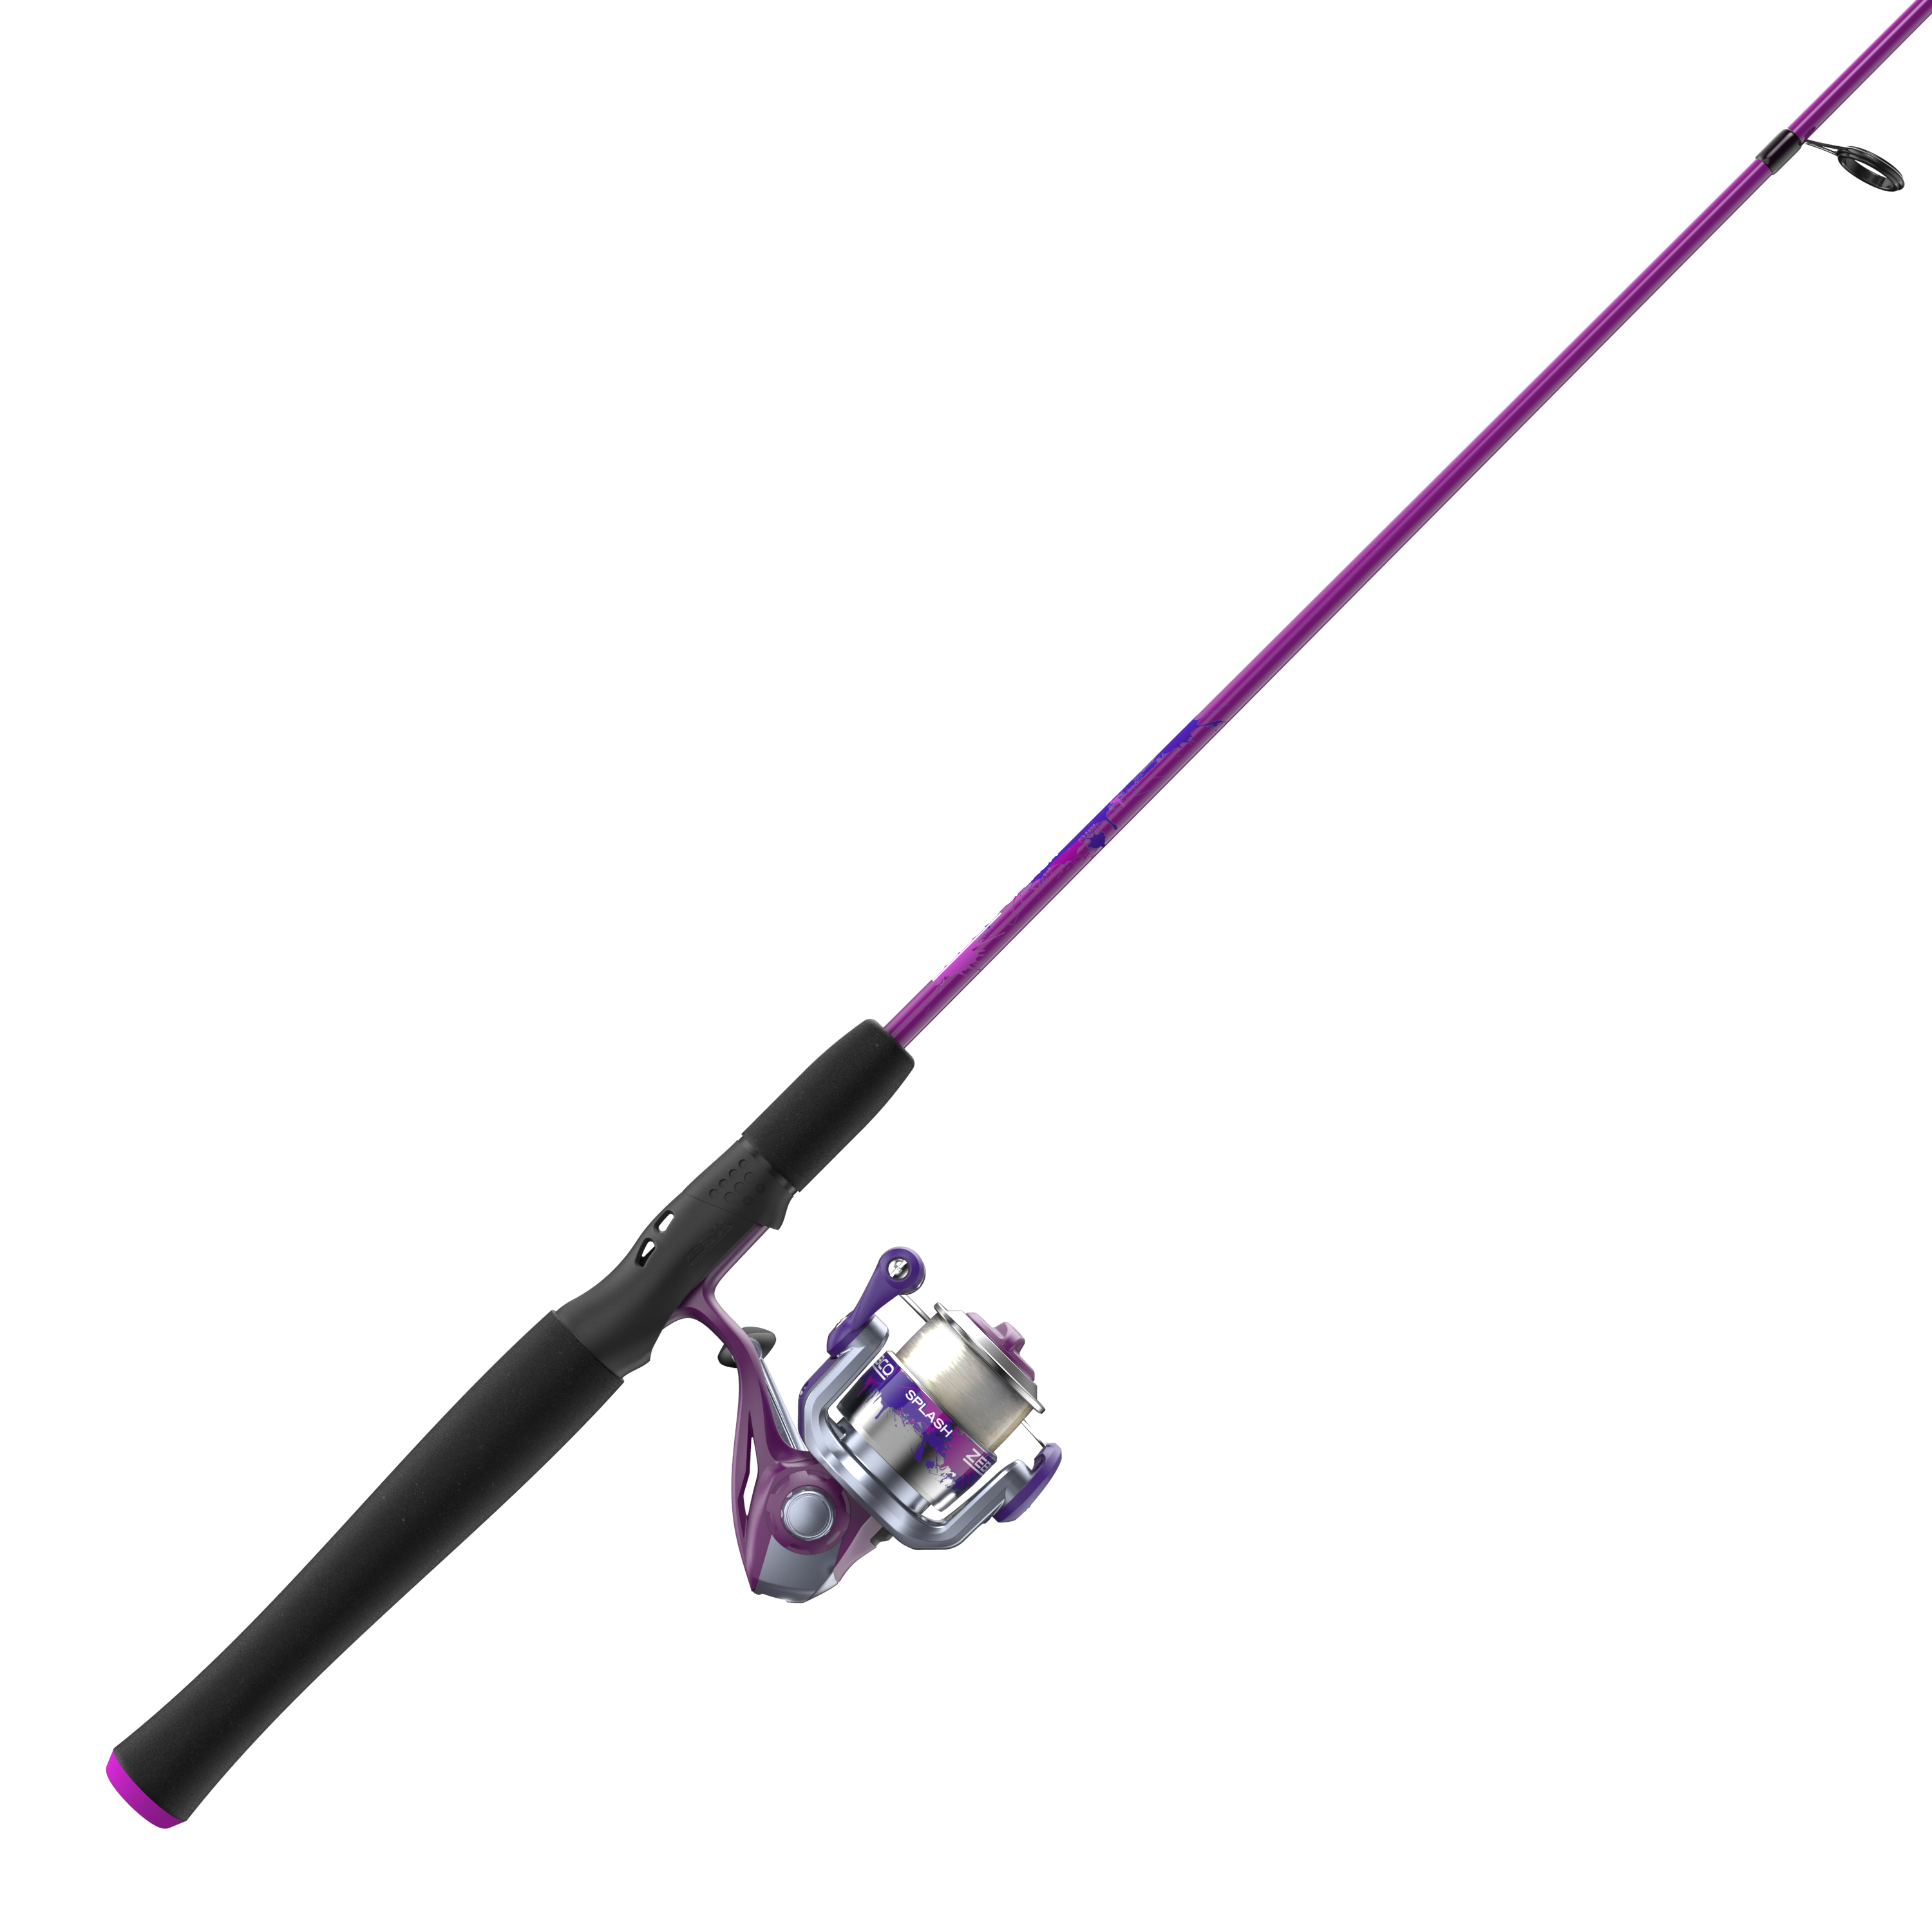 Zebco Slingshot Spinning Reel and Fishing Rod Combo, 2-Piece Medium-Light  Durable Fiberglass Rod, Comfortable EVA Handle, Pre-Spooled with 8-Pound